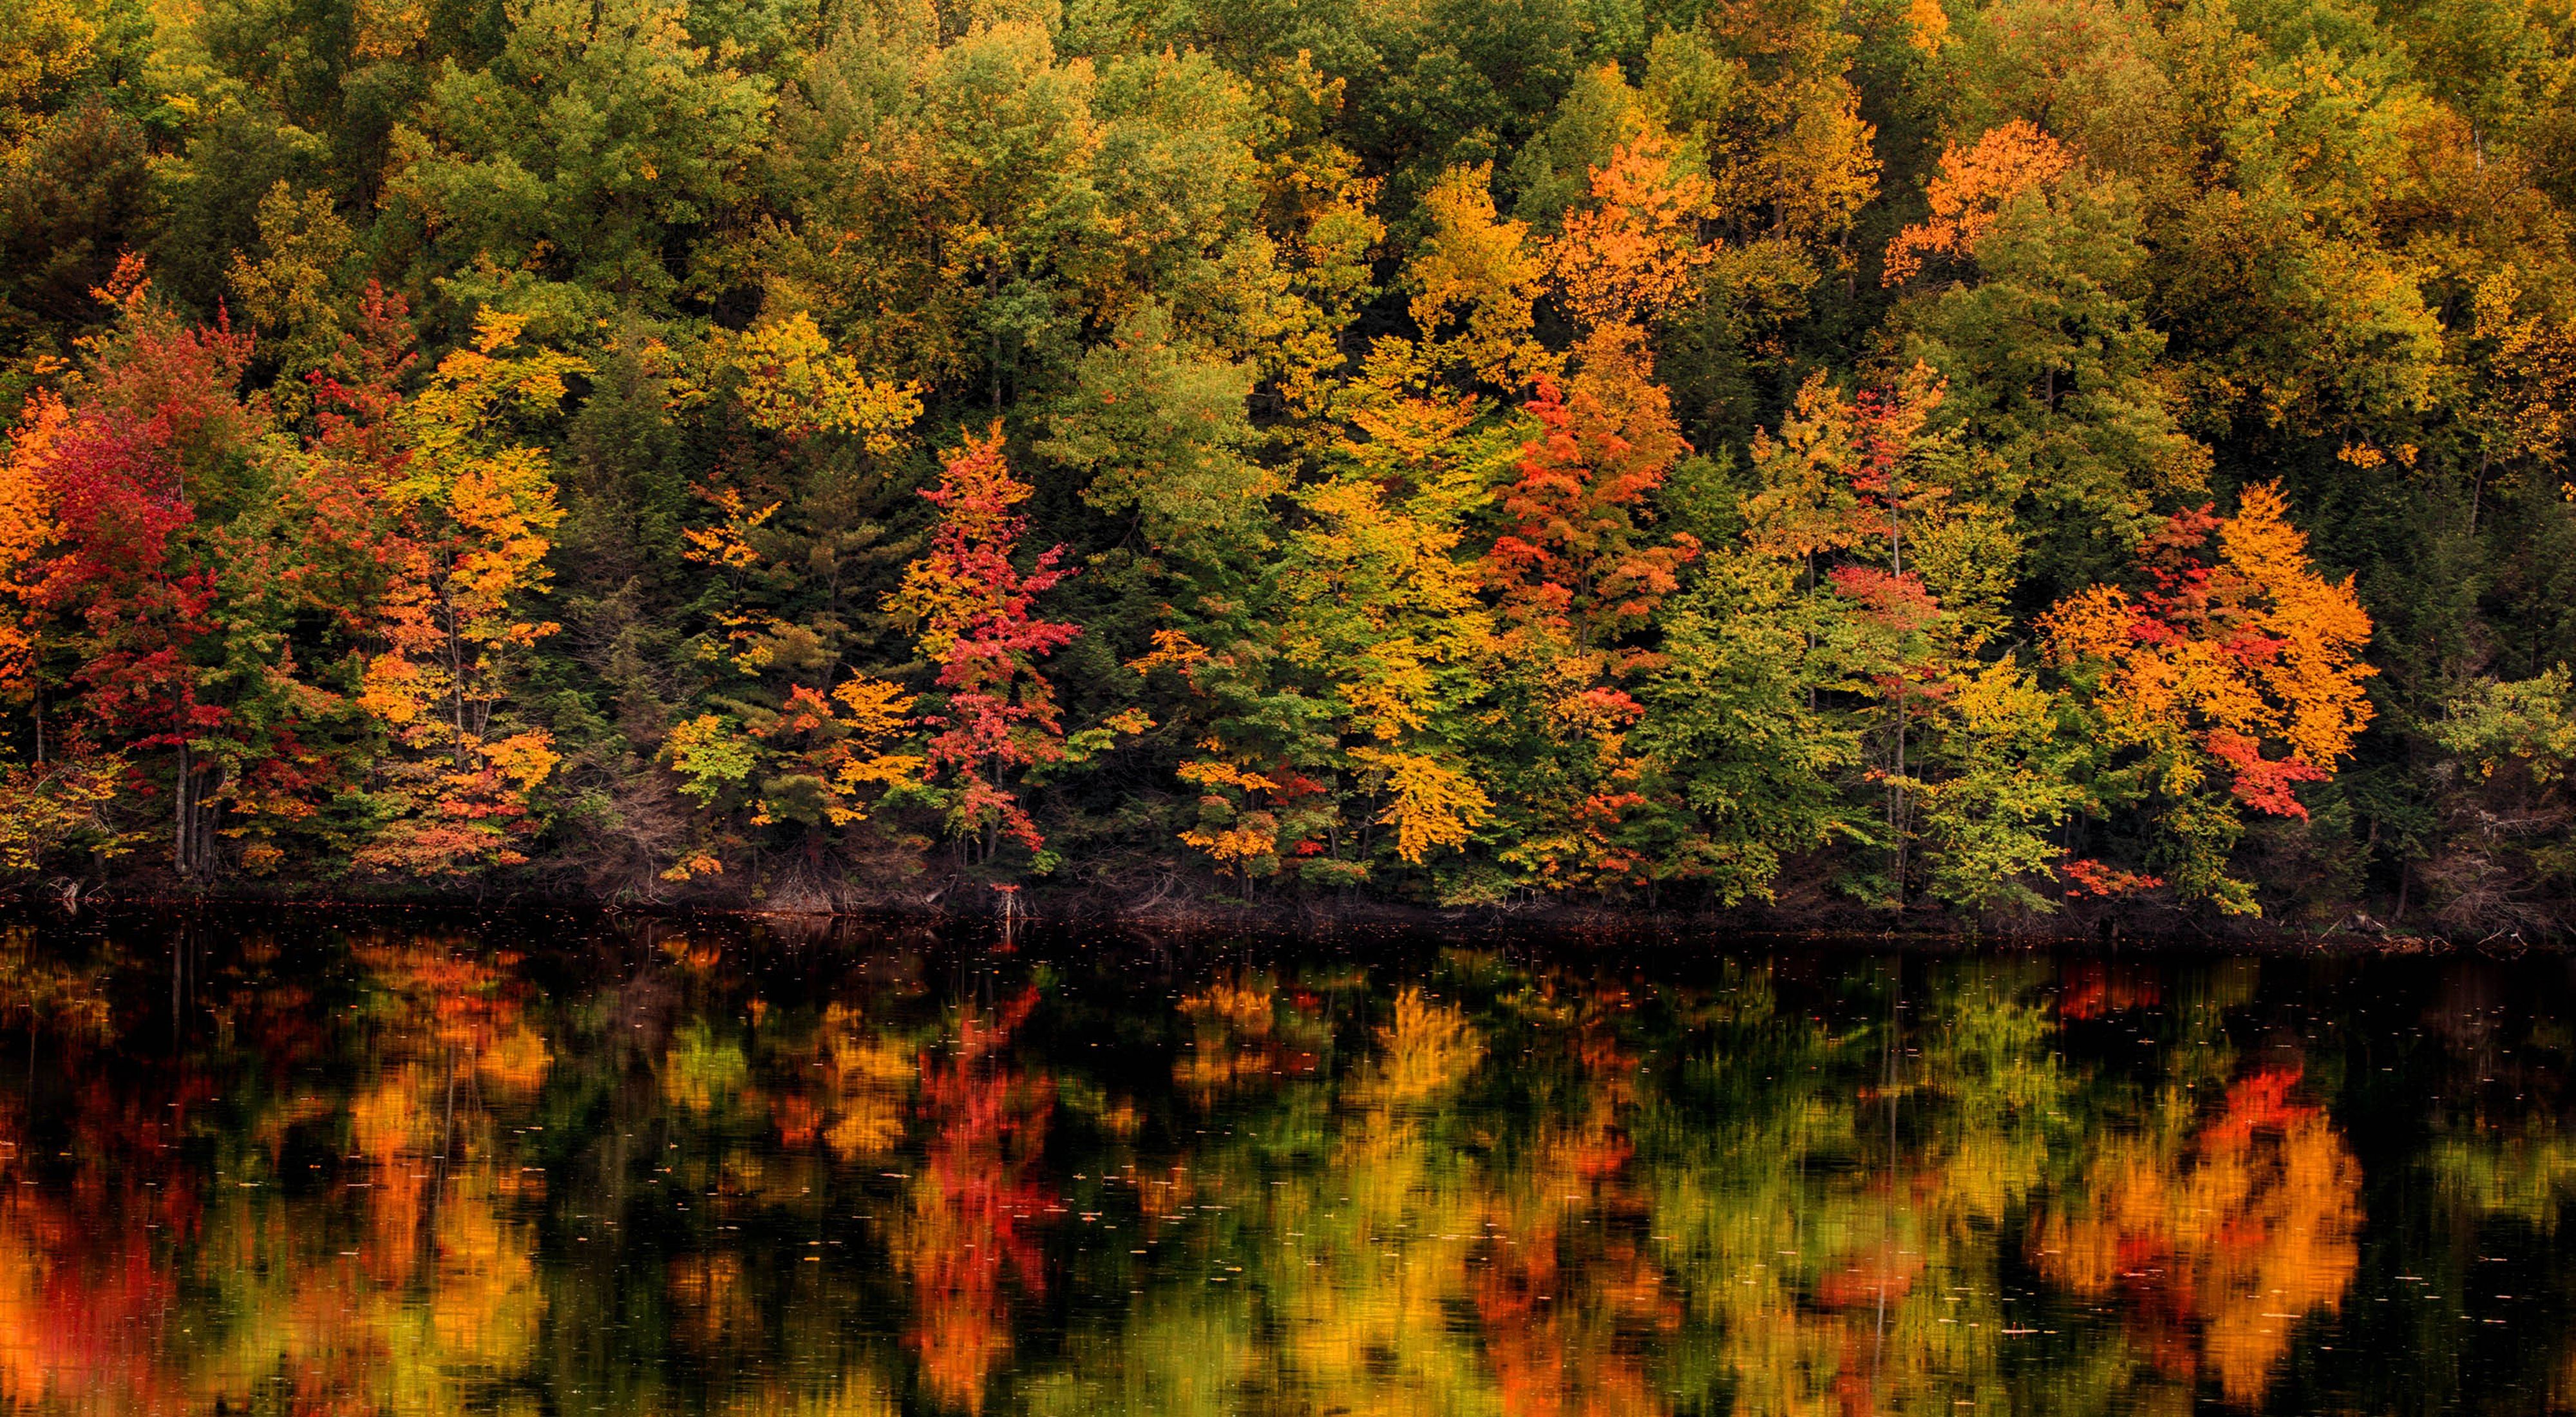 A treeline in the autumn. The colorful trees are reflected in the still water. 